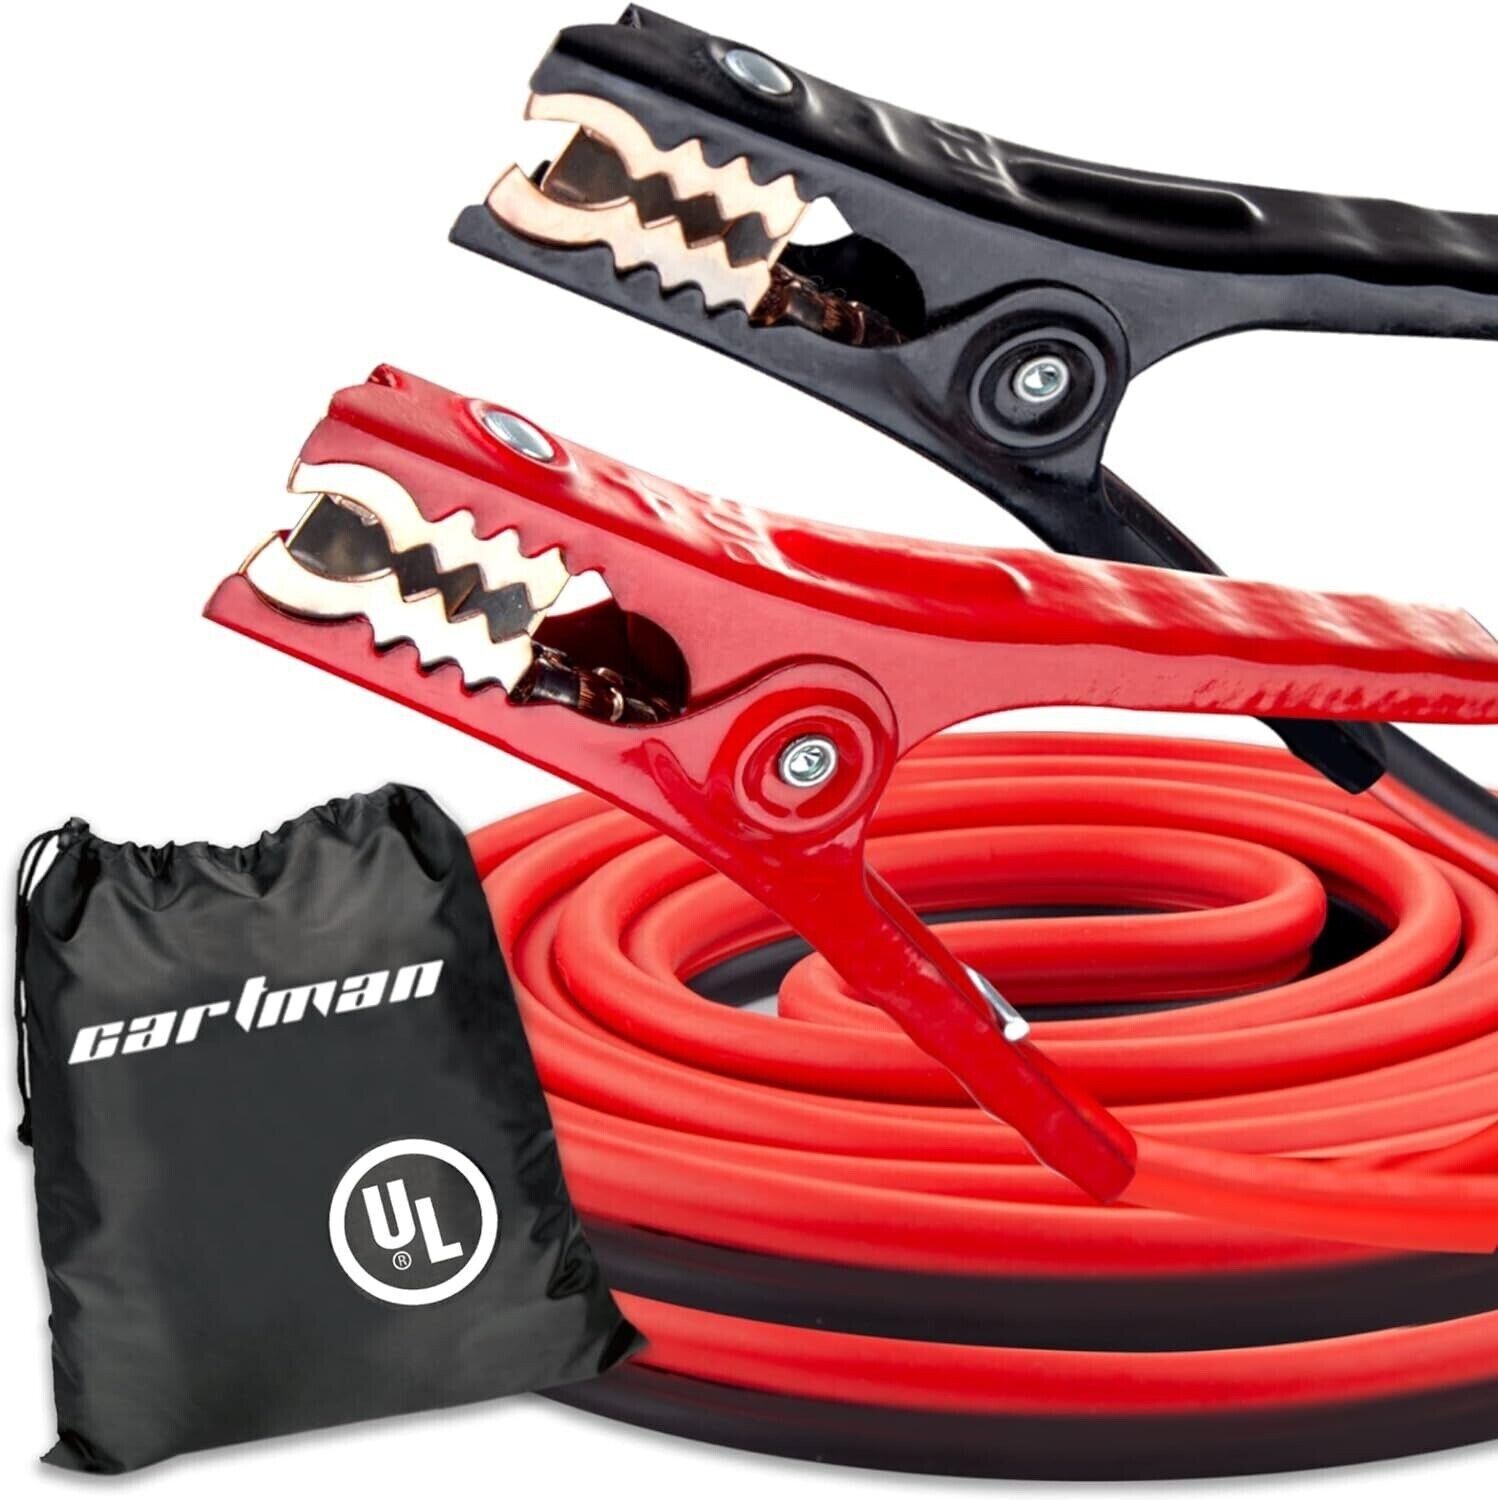 CARTMAN 2 Gauge 16 Feet Jumper Cables UL Listed Heavy Duty Booster Cables